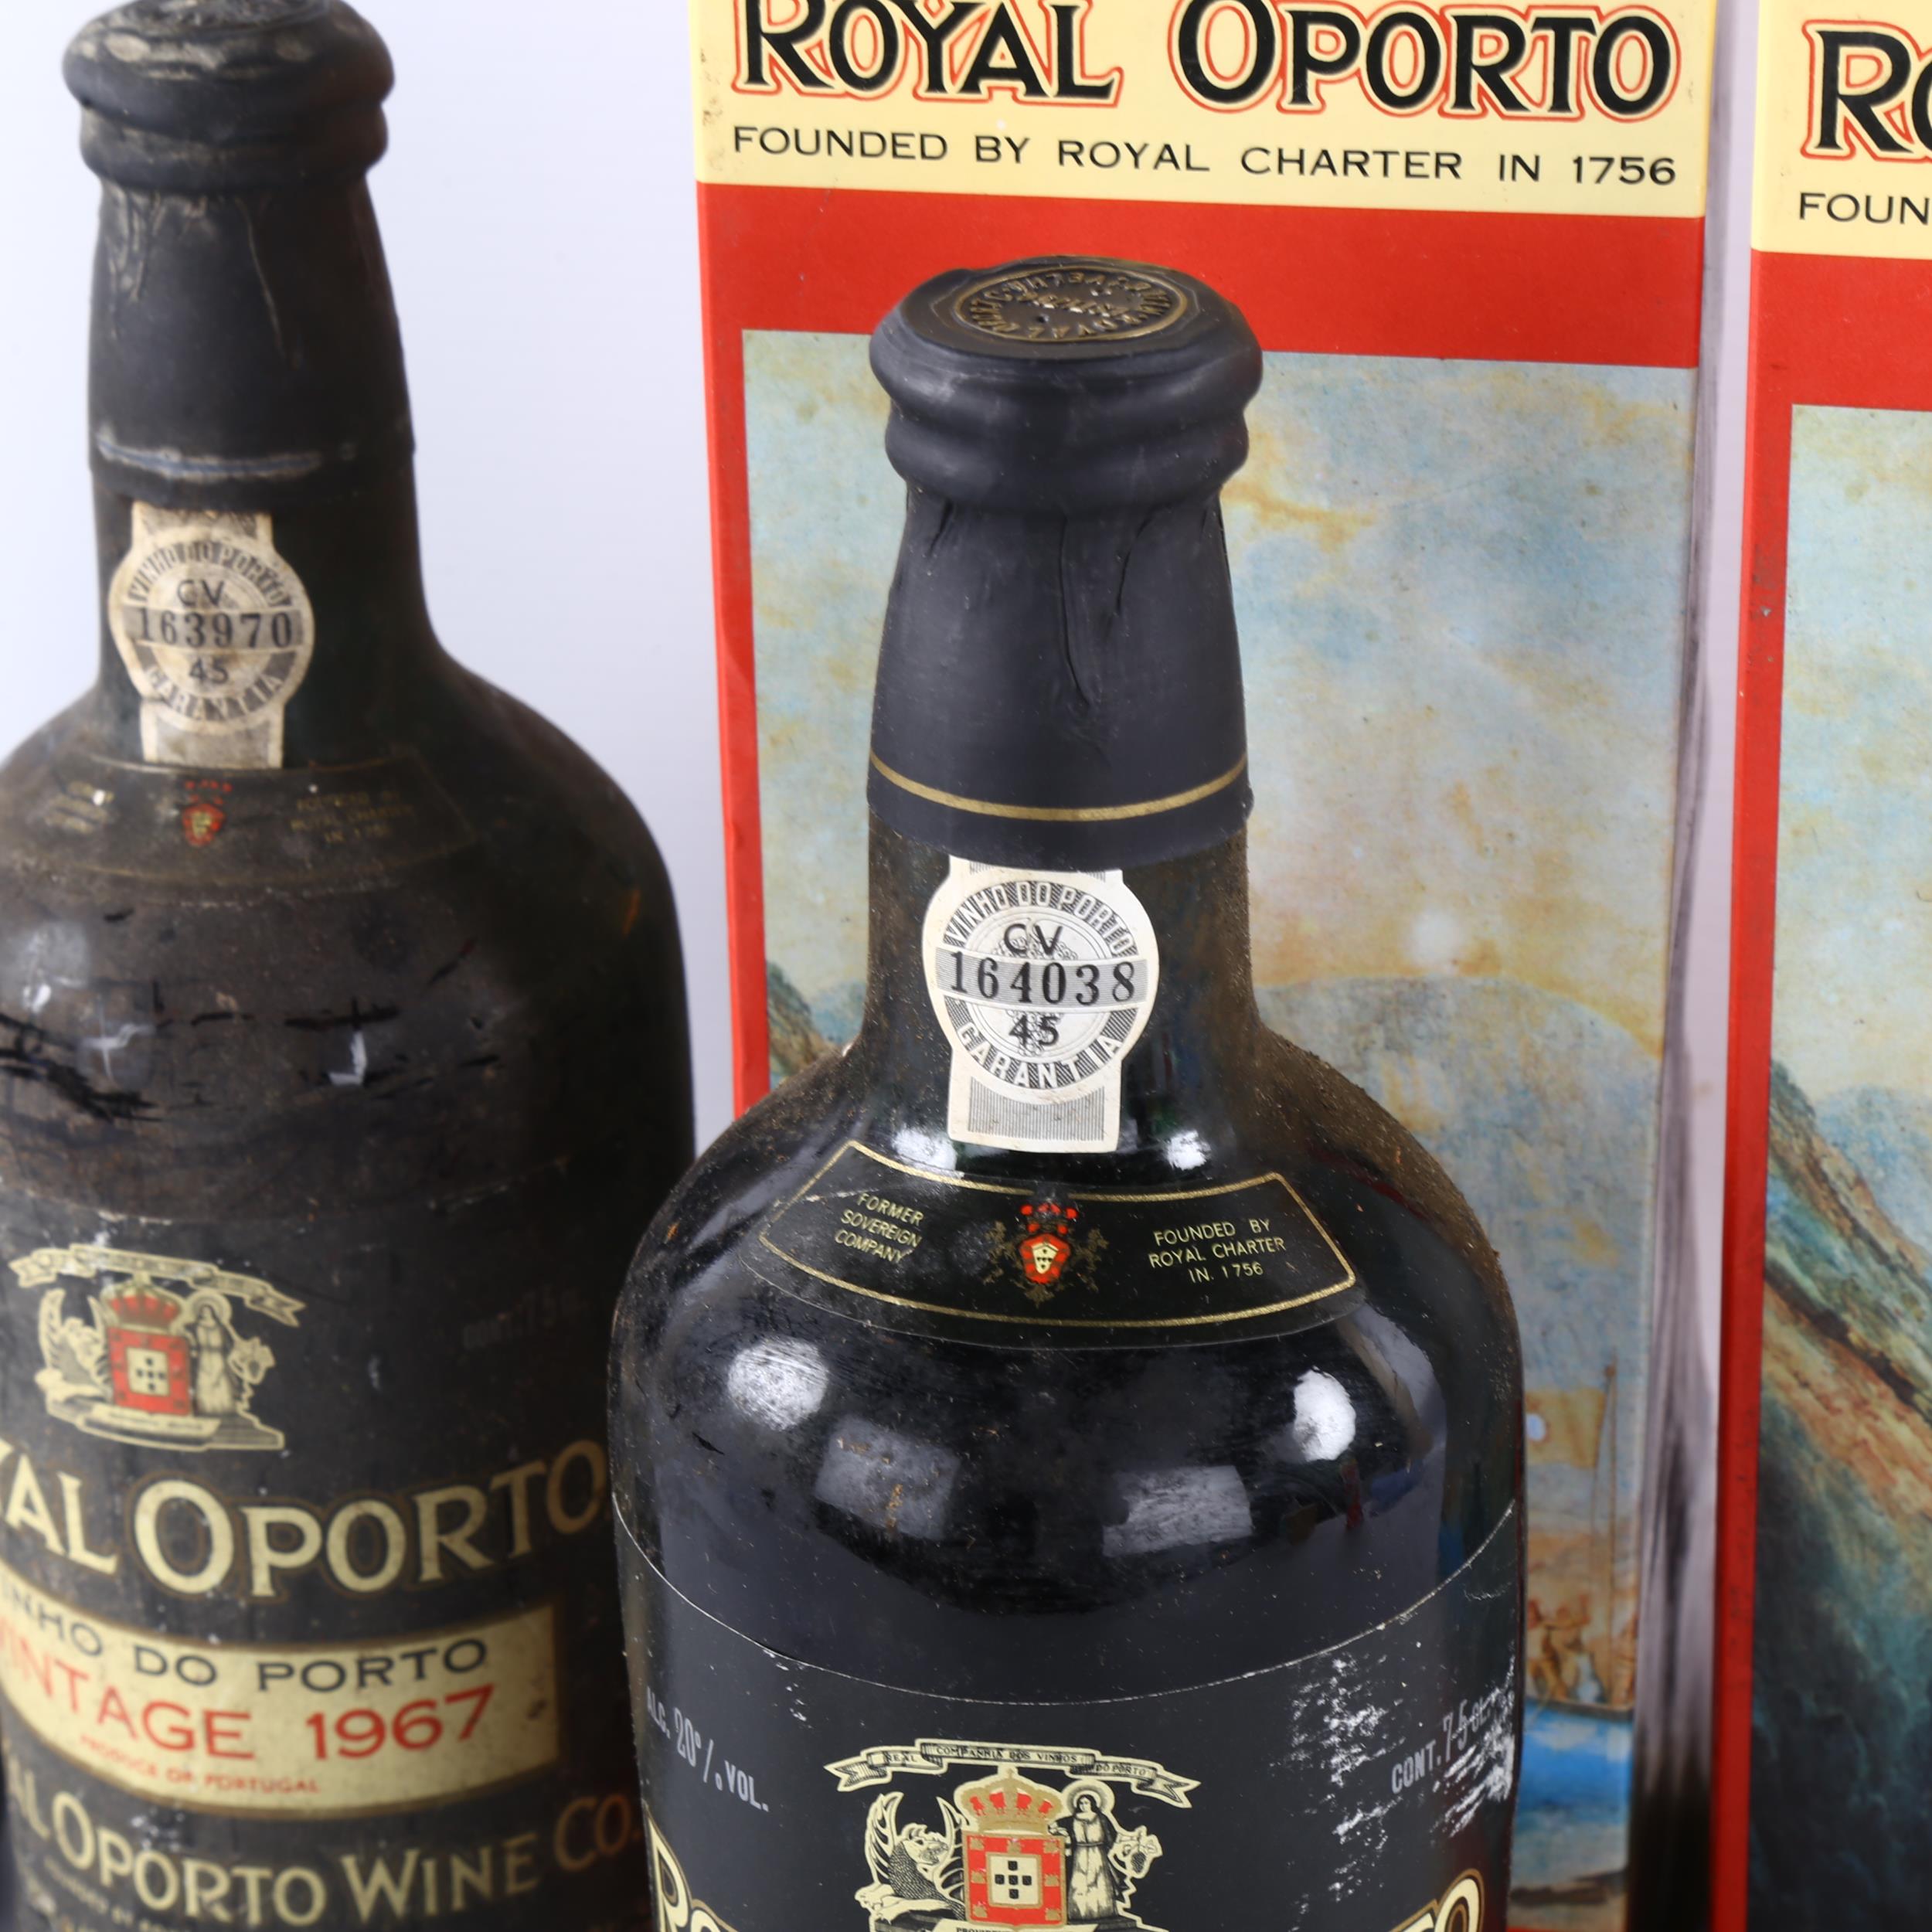 4 bottles of vintage port, 1967 Royal Oporto, 2 in original box Capsules intact, levels high - Image 3 of 3